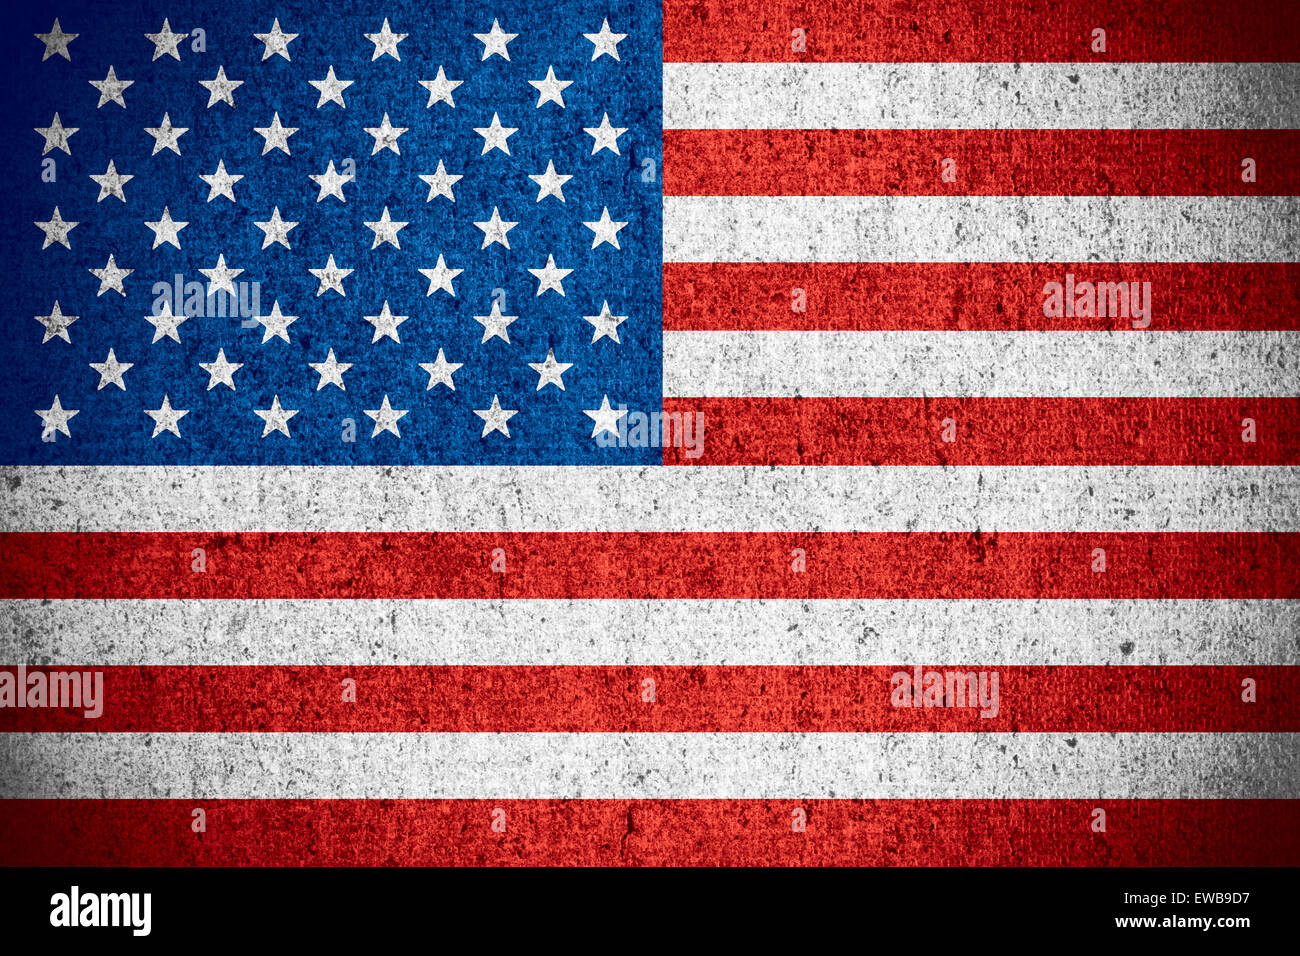 United States of America flag or American banner on rough pattern texture Stock Photo